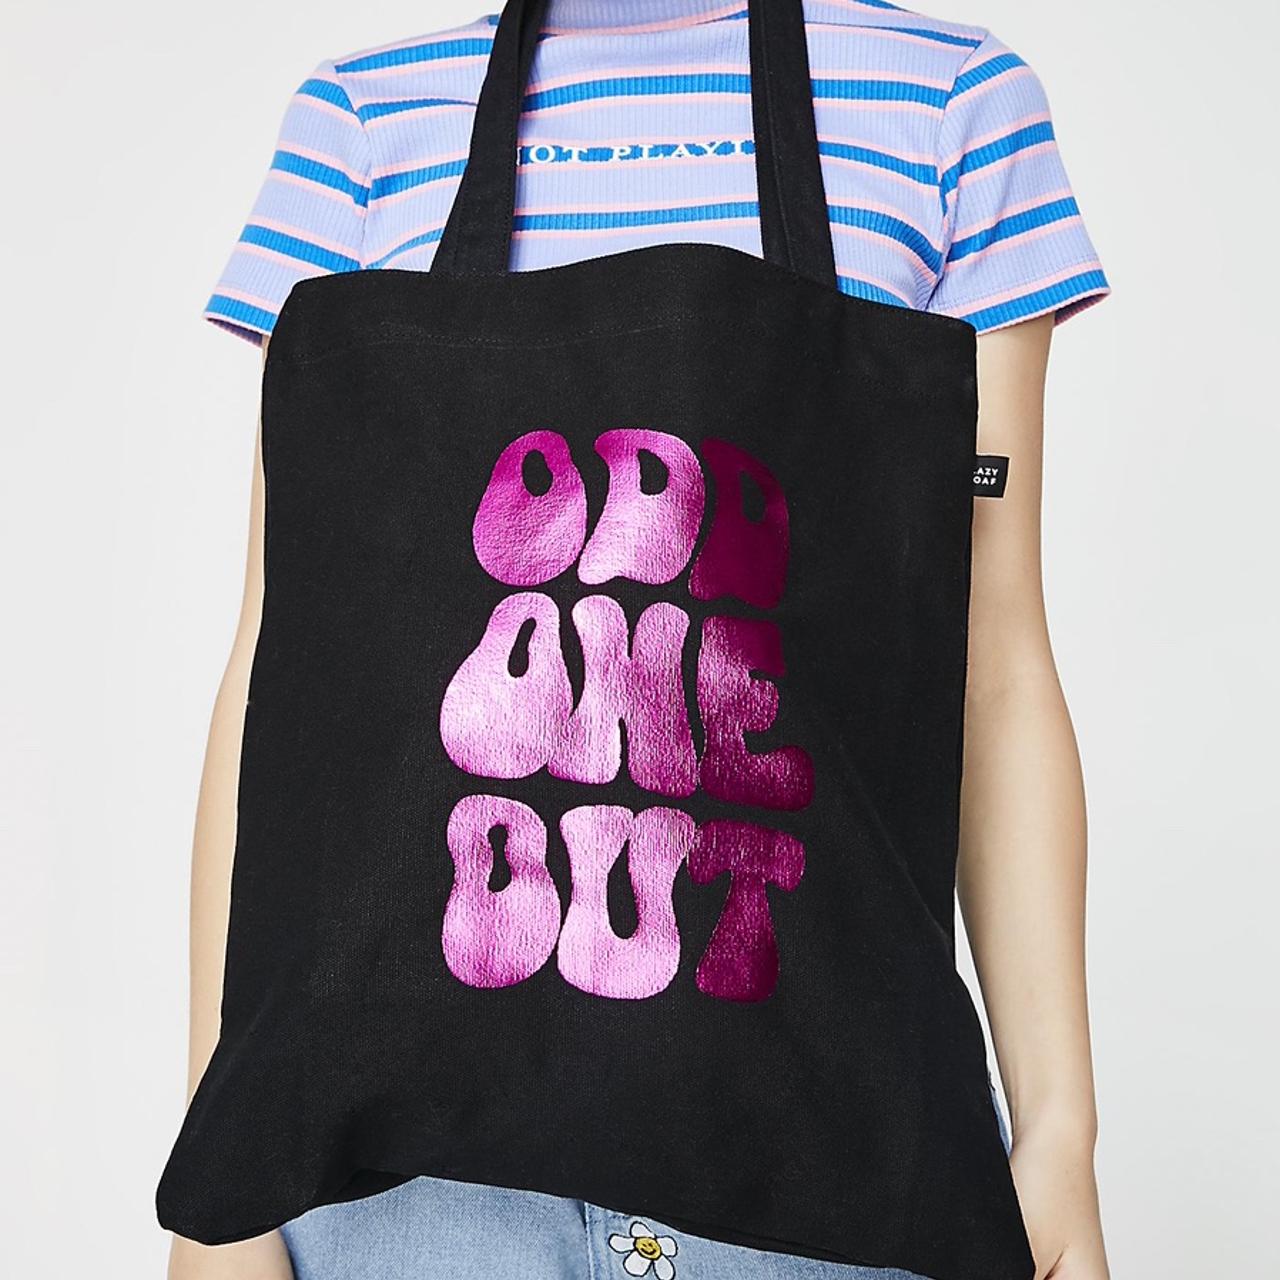 BNWT Lazy Oaf Odd One Out Tote Bag 👀, Brand new